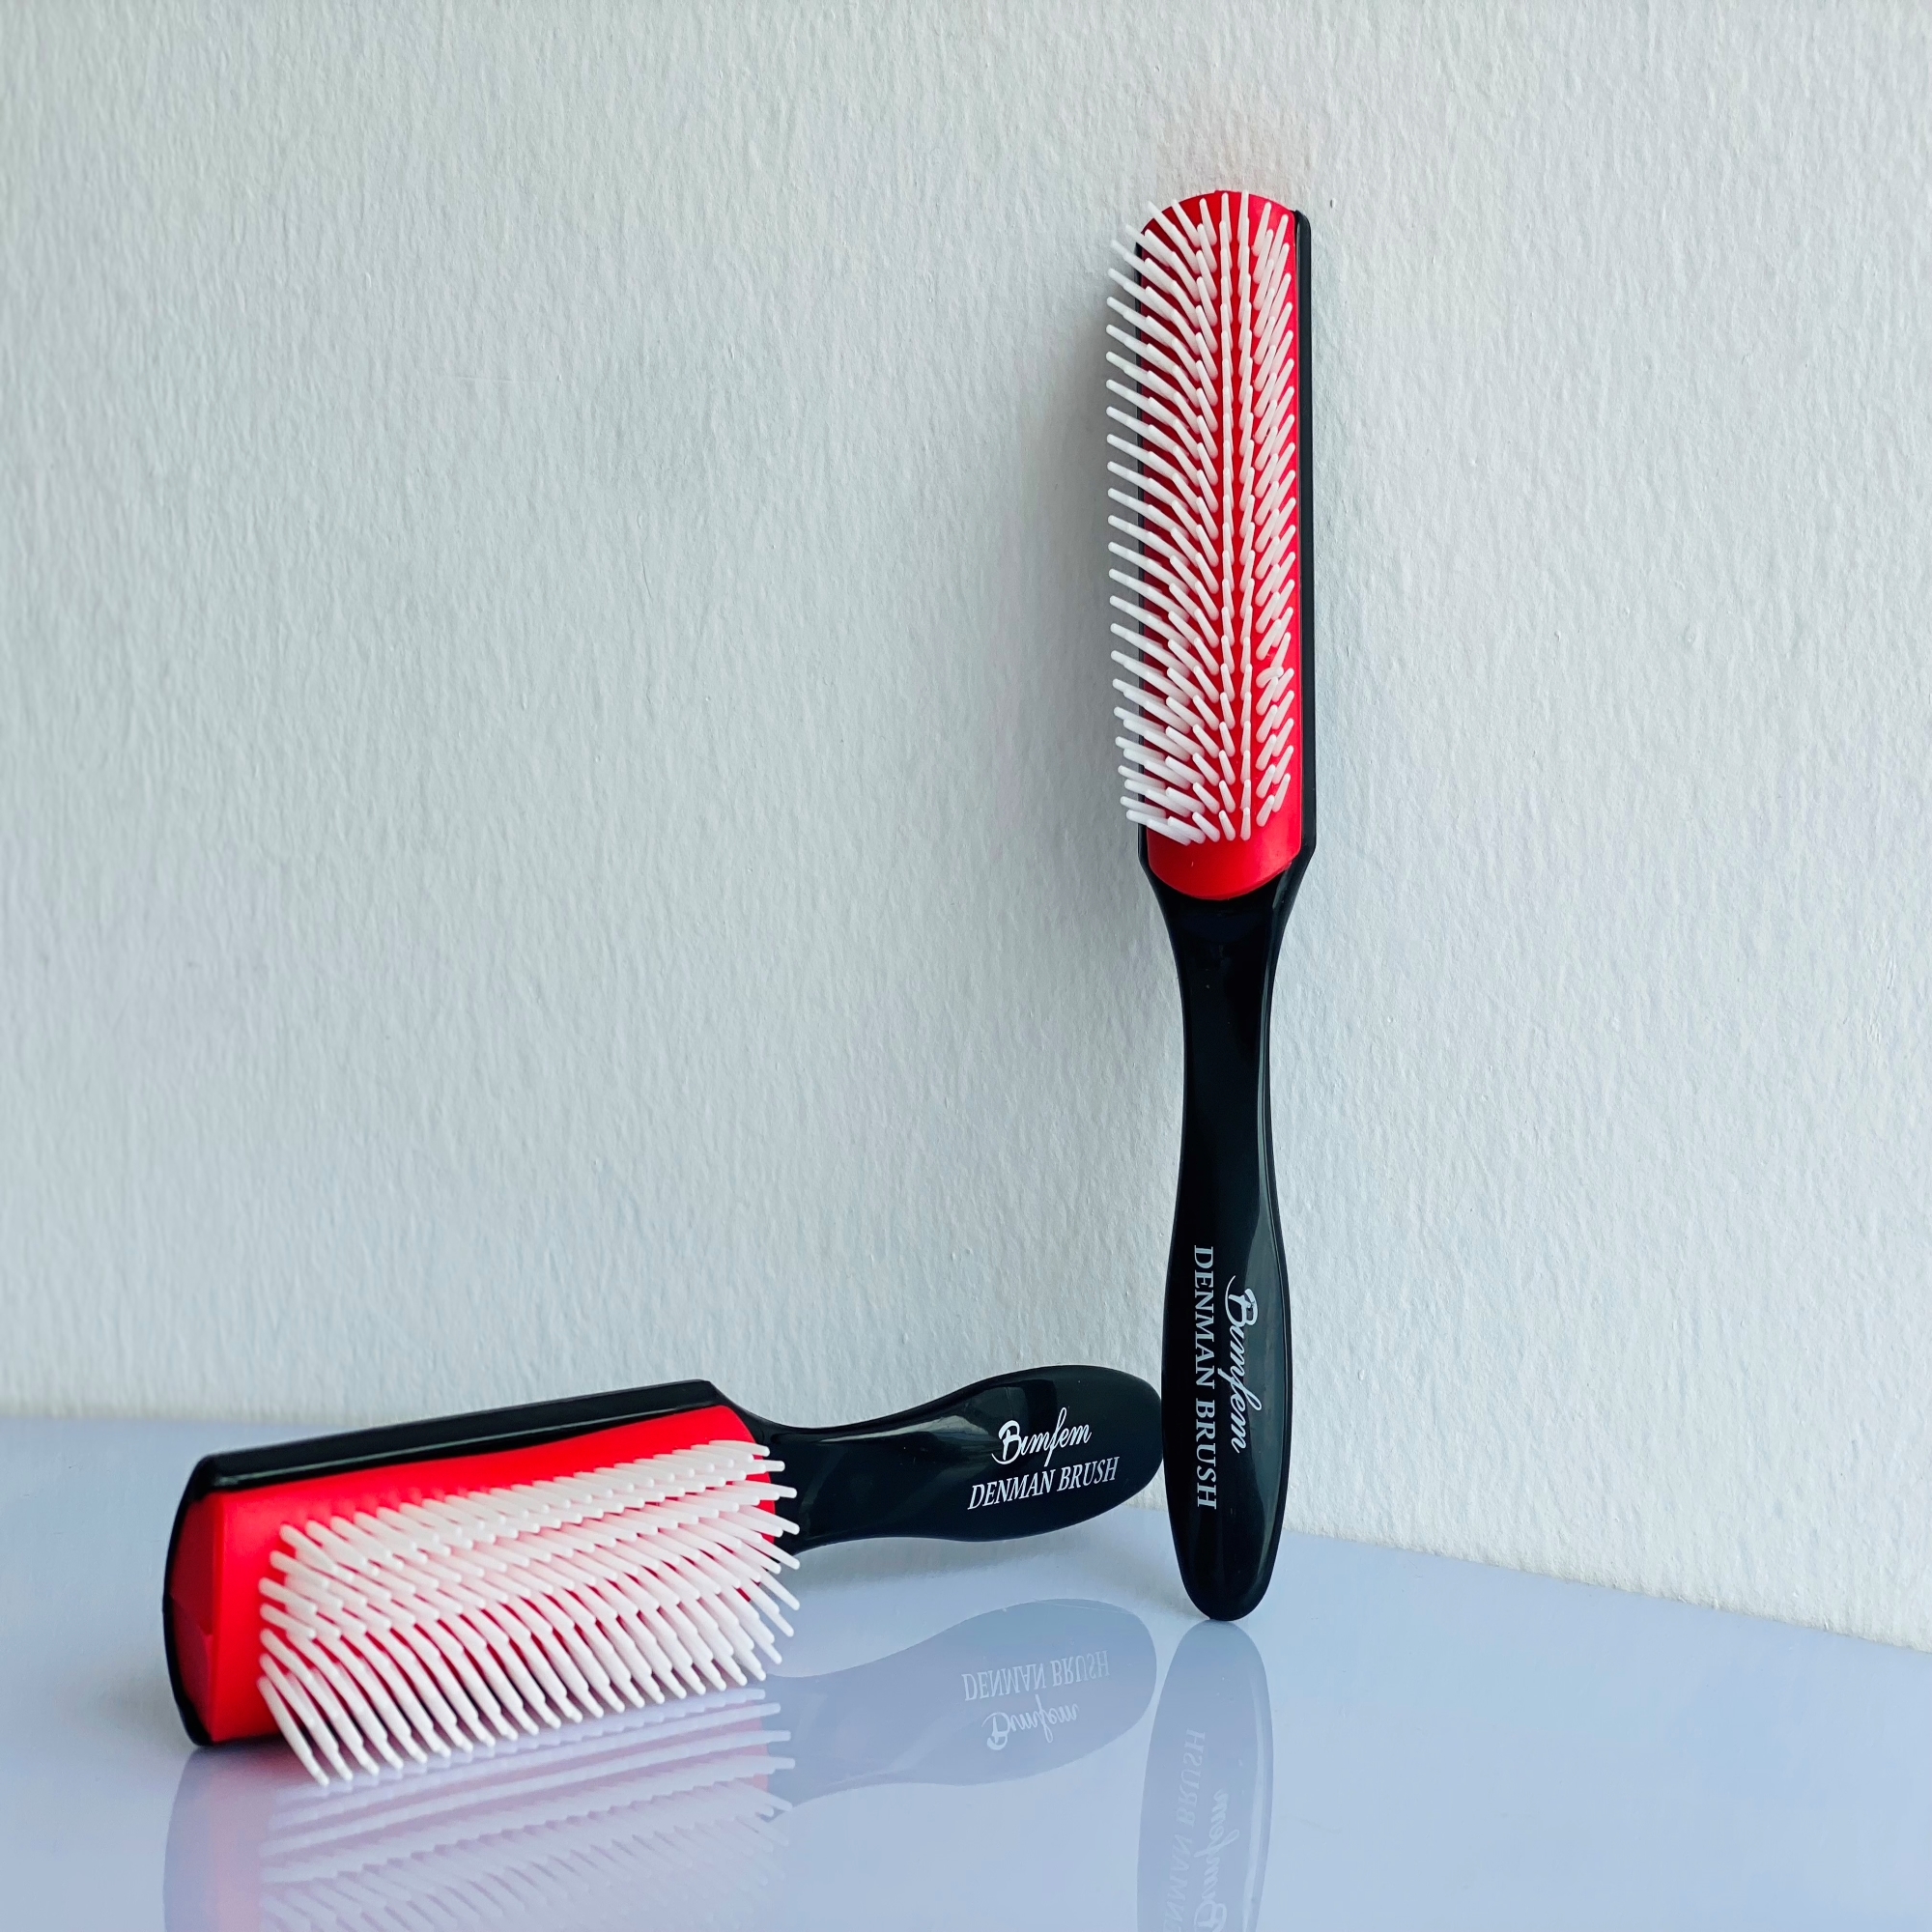 What Does A Denman Brush Do